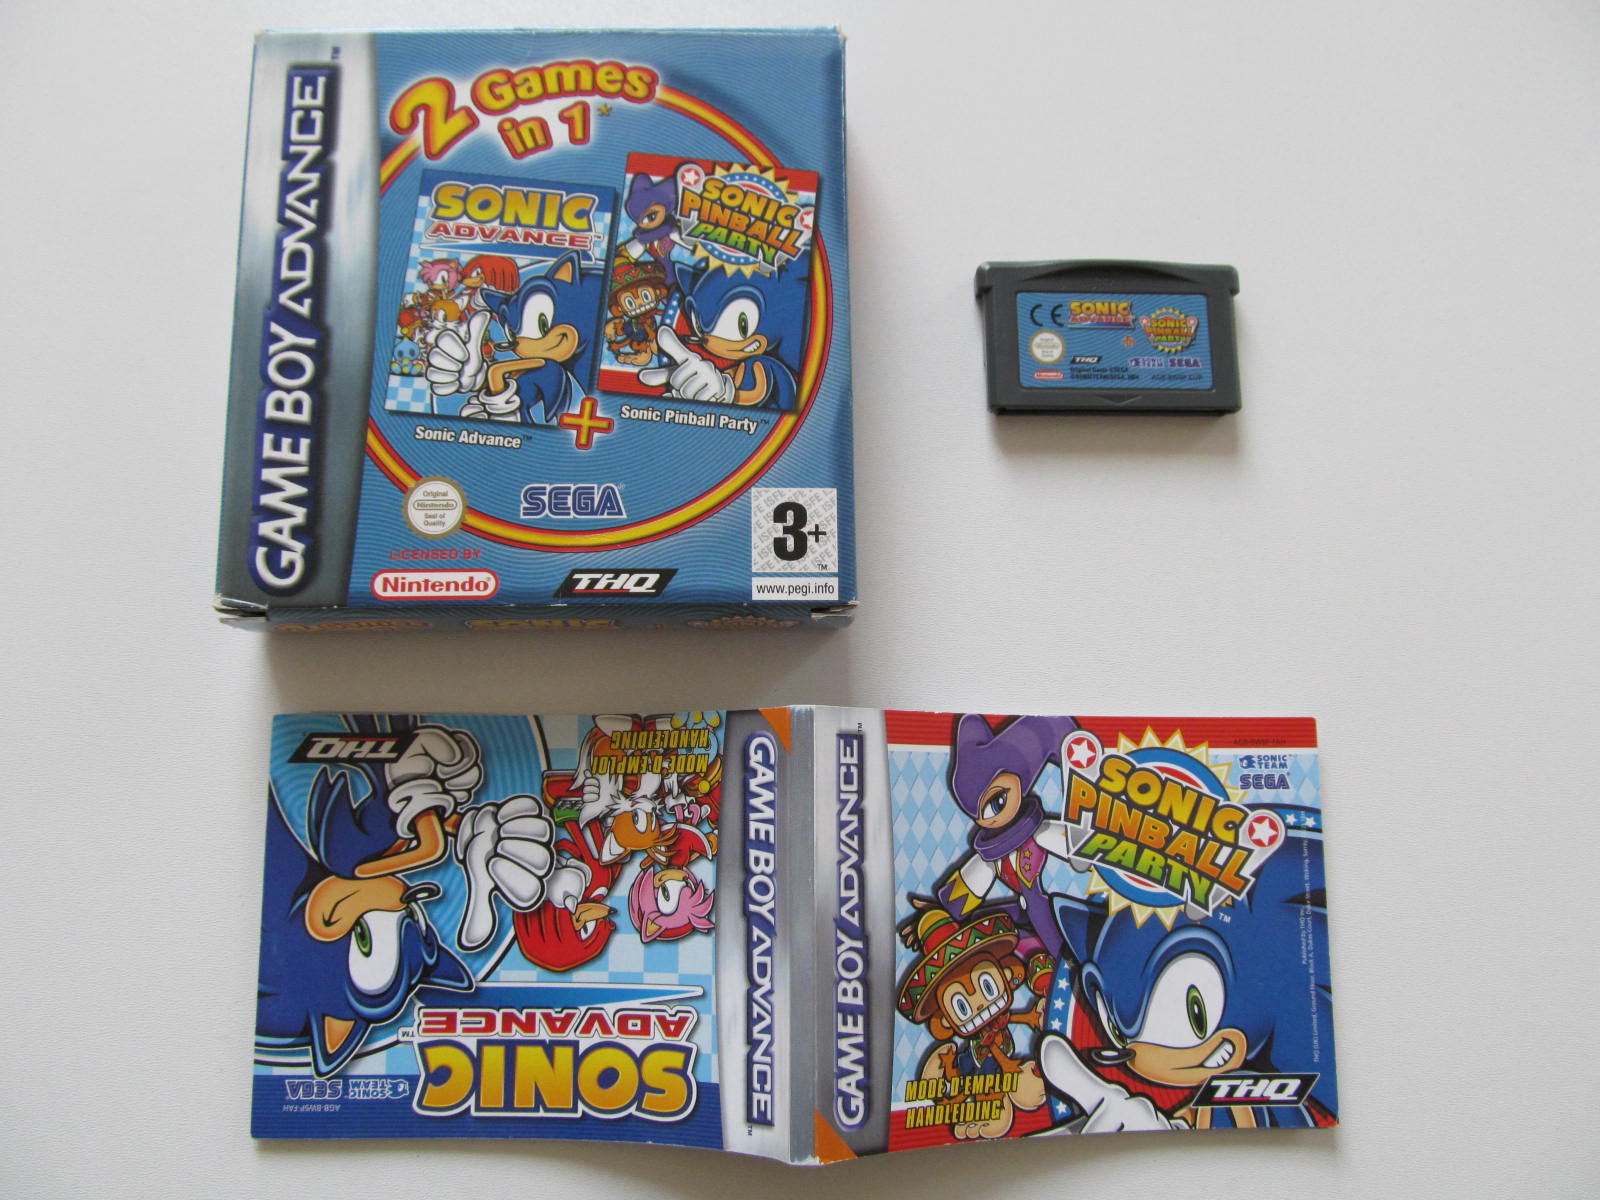 2 Games in 1 - Sonic Advance + Sonic Pinball Party